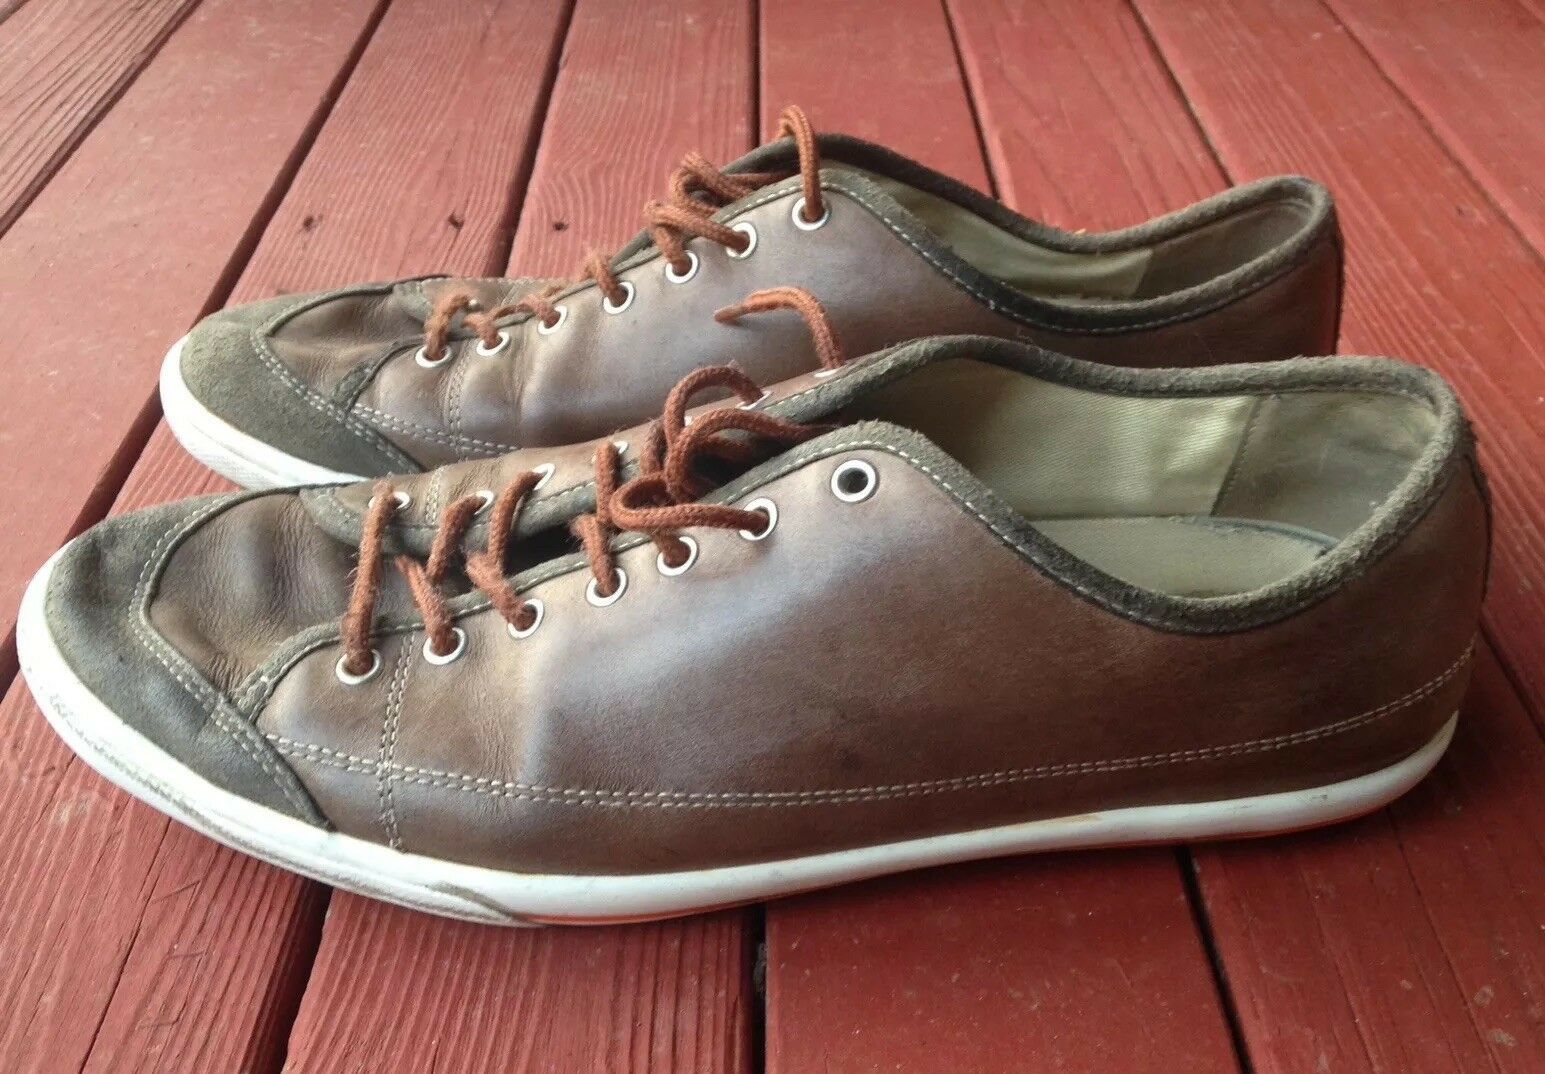 Cole Haan Brown Low Profile Leather Sneakers Size 11 - $32.20